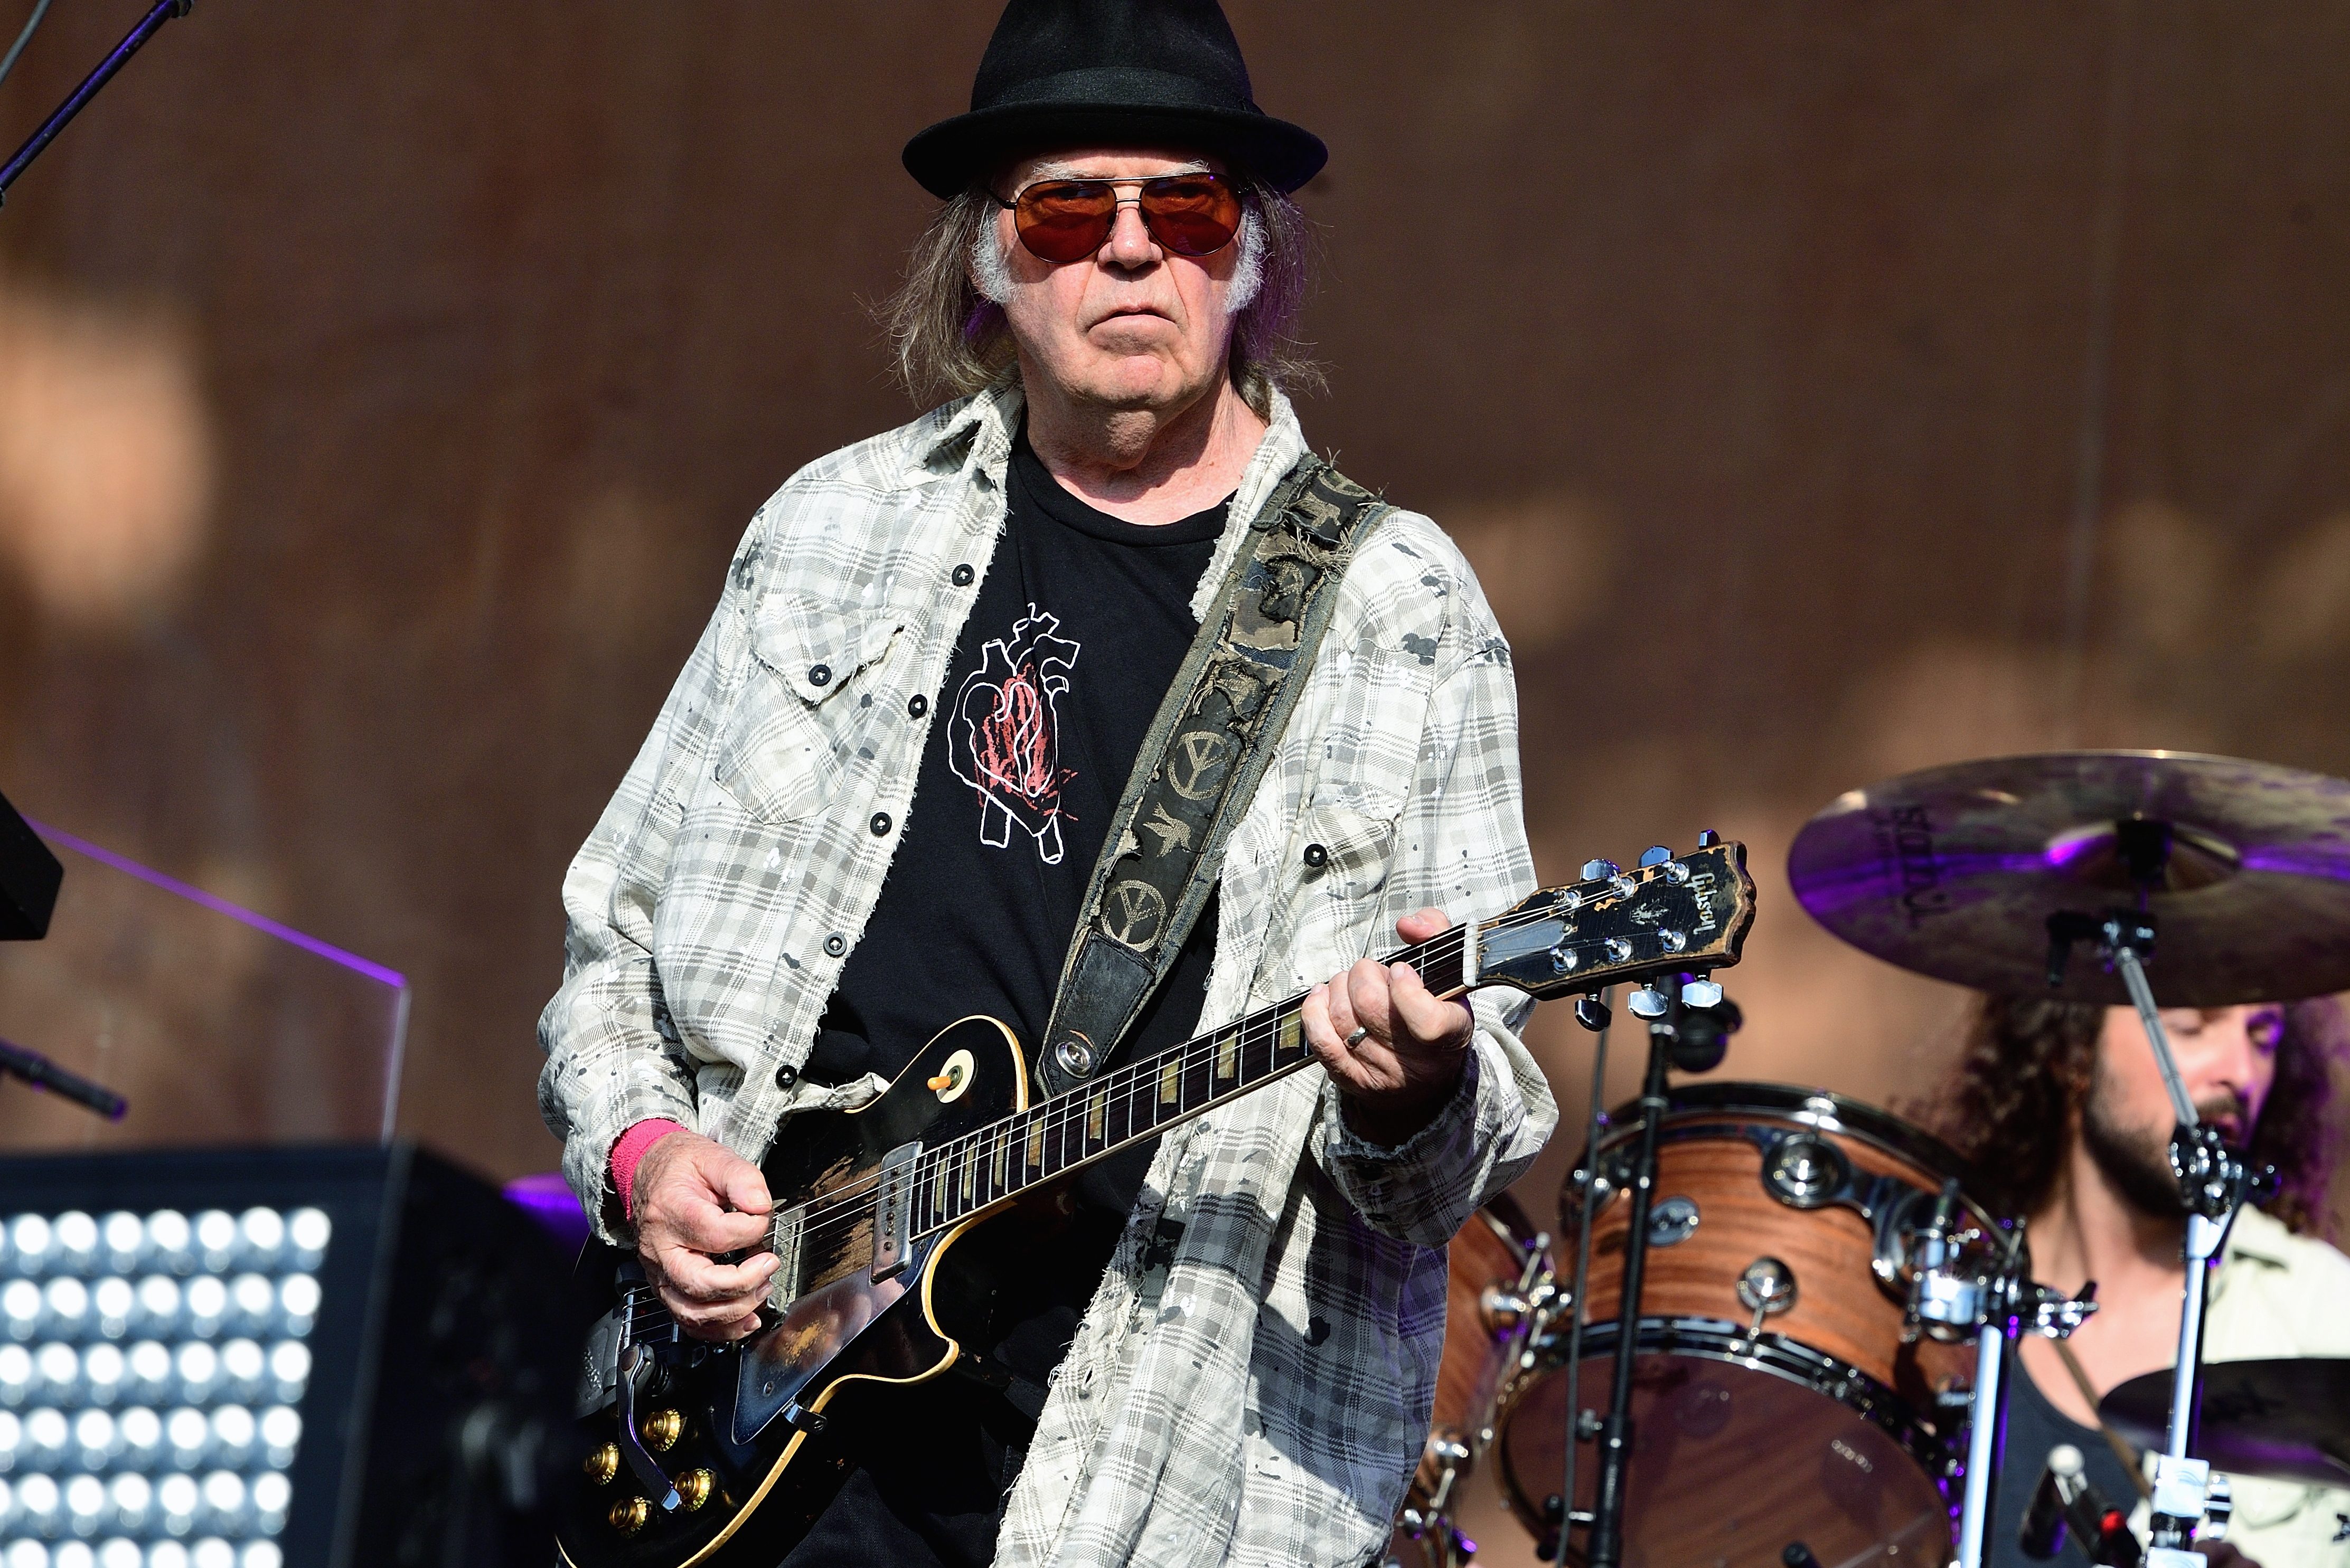 Neil Young performs at Barclaycard Presents British Summer Time Hyde Park at Hyde Park on July 12, 2019 in London, England. Here's how to stream Young's music now that he's off Spotify after criticizing the streaming platform for hosting Joe Rogan.